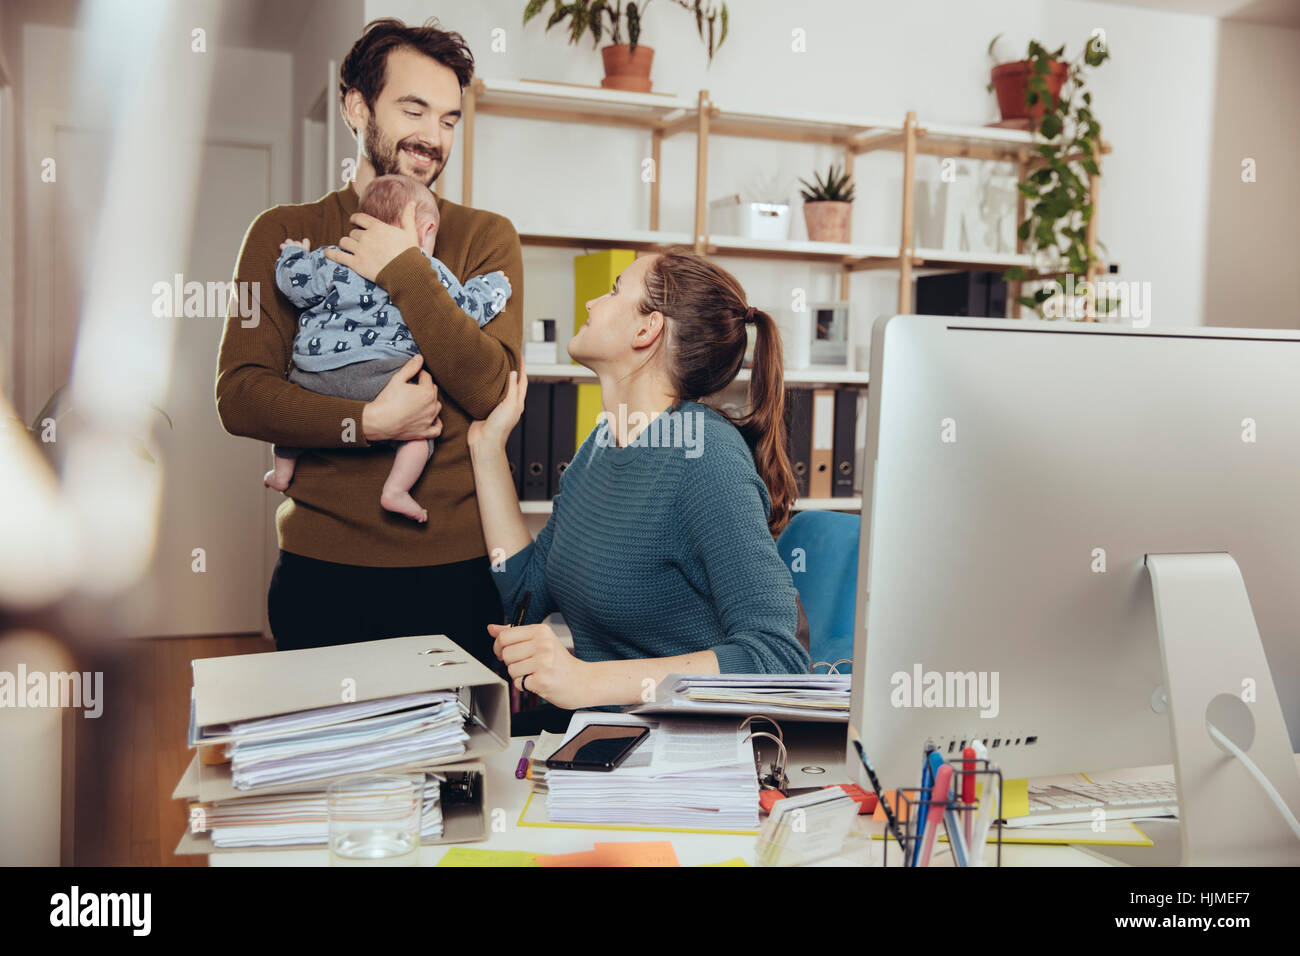 Smiling mother at desk looking at father holding baby in home office Stock Photo